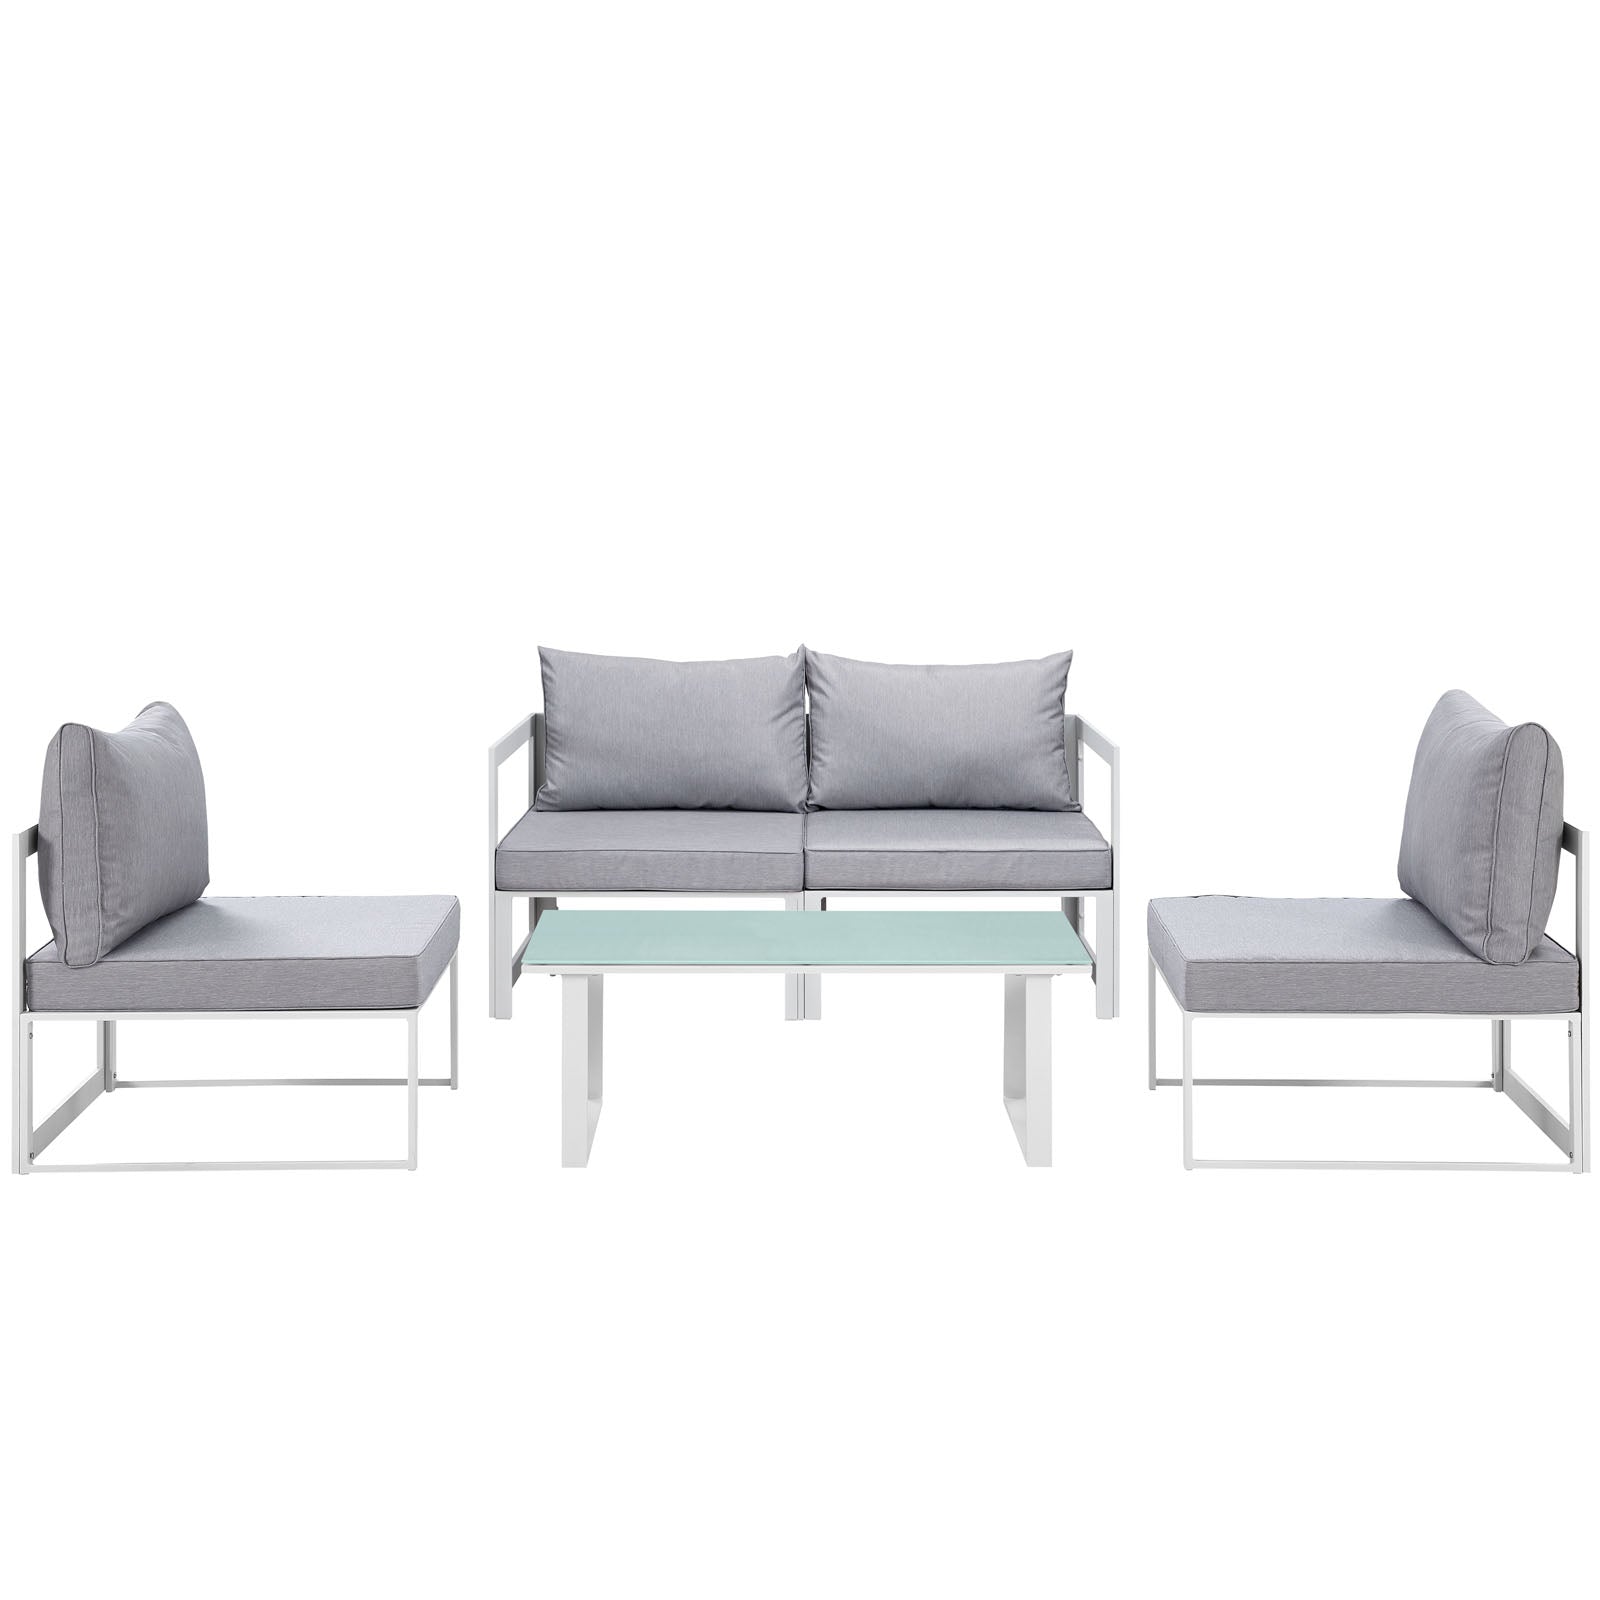 Modway Outdoor Conversation Sets - Fortuna 5 Piece Outdoor Patio Sectional Sofa Set White & Gray